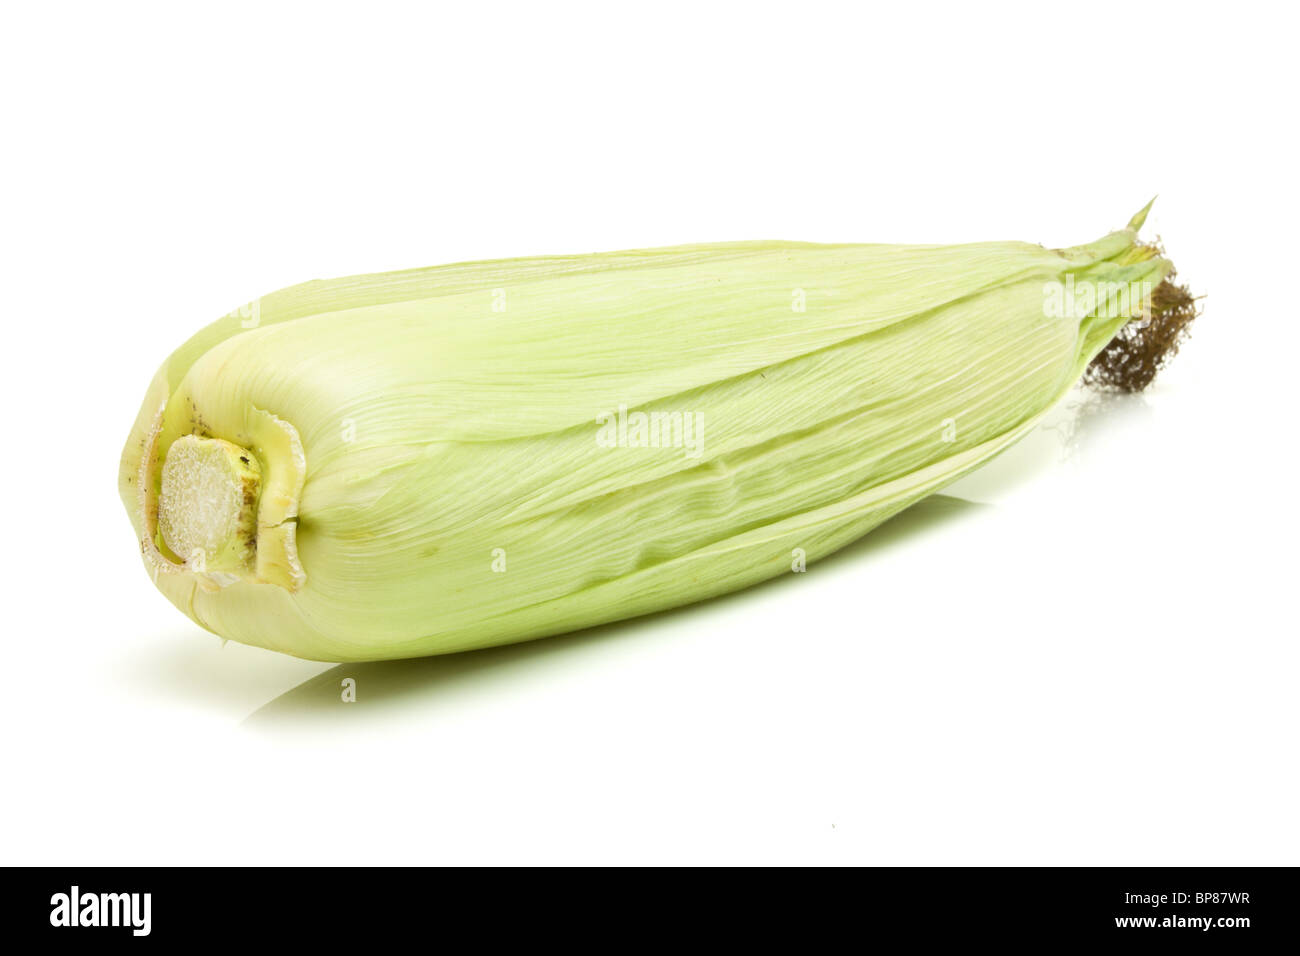 Corn on the Cob husk from low perspective isolated against white background. Stock Photo